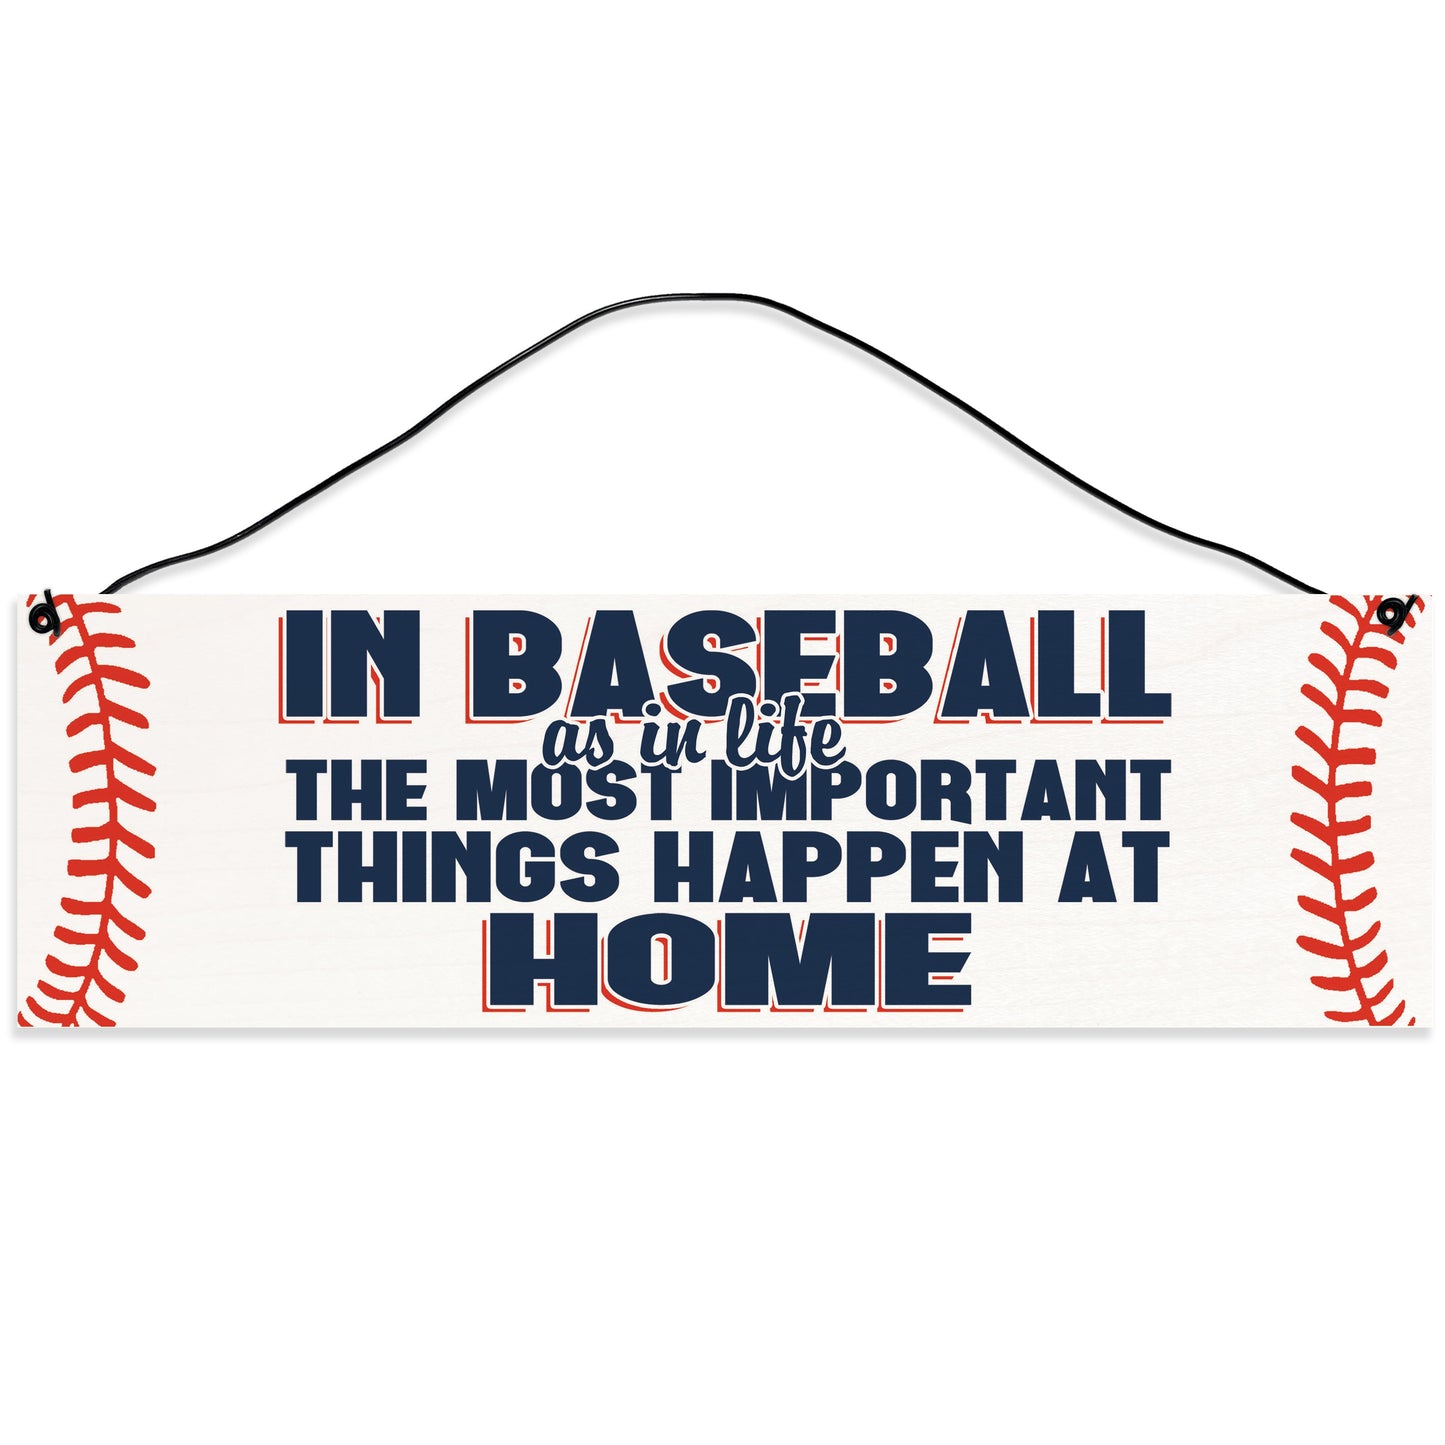 Sawyer's Mill - Baseball. The Most Important Things Happen at Home. Wood Sign for Home or Office. Measures 3x10 inches.